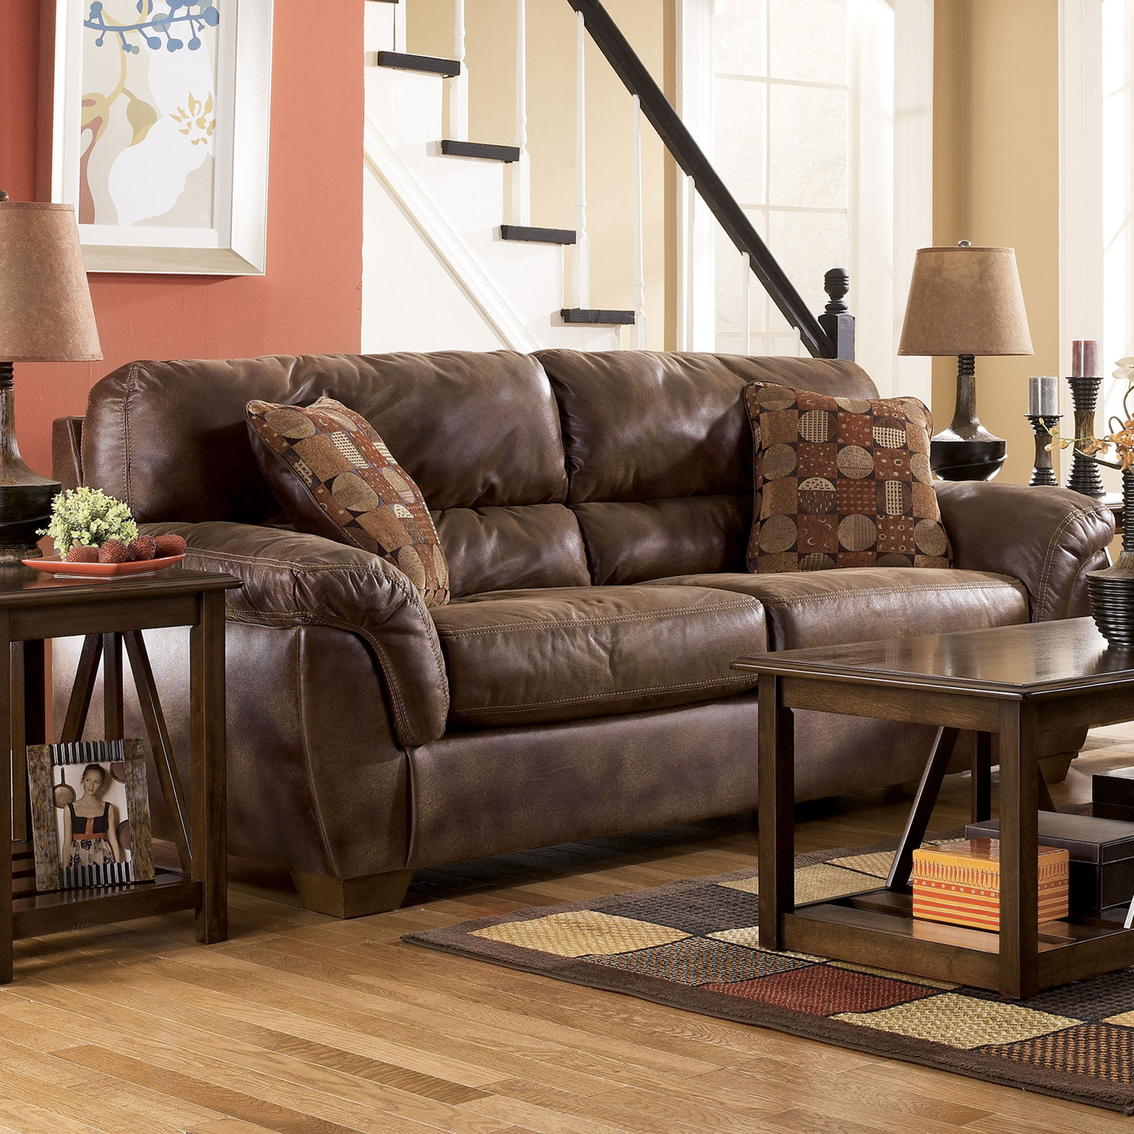 Ashley Frontier Canyon Sofa | Atg Archive | Shop The Exchange